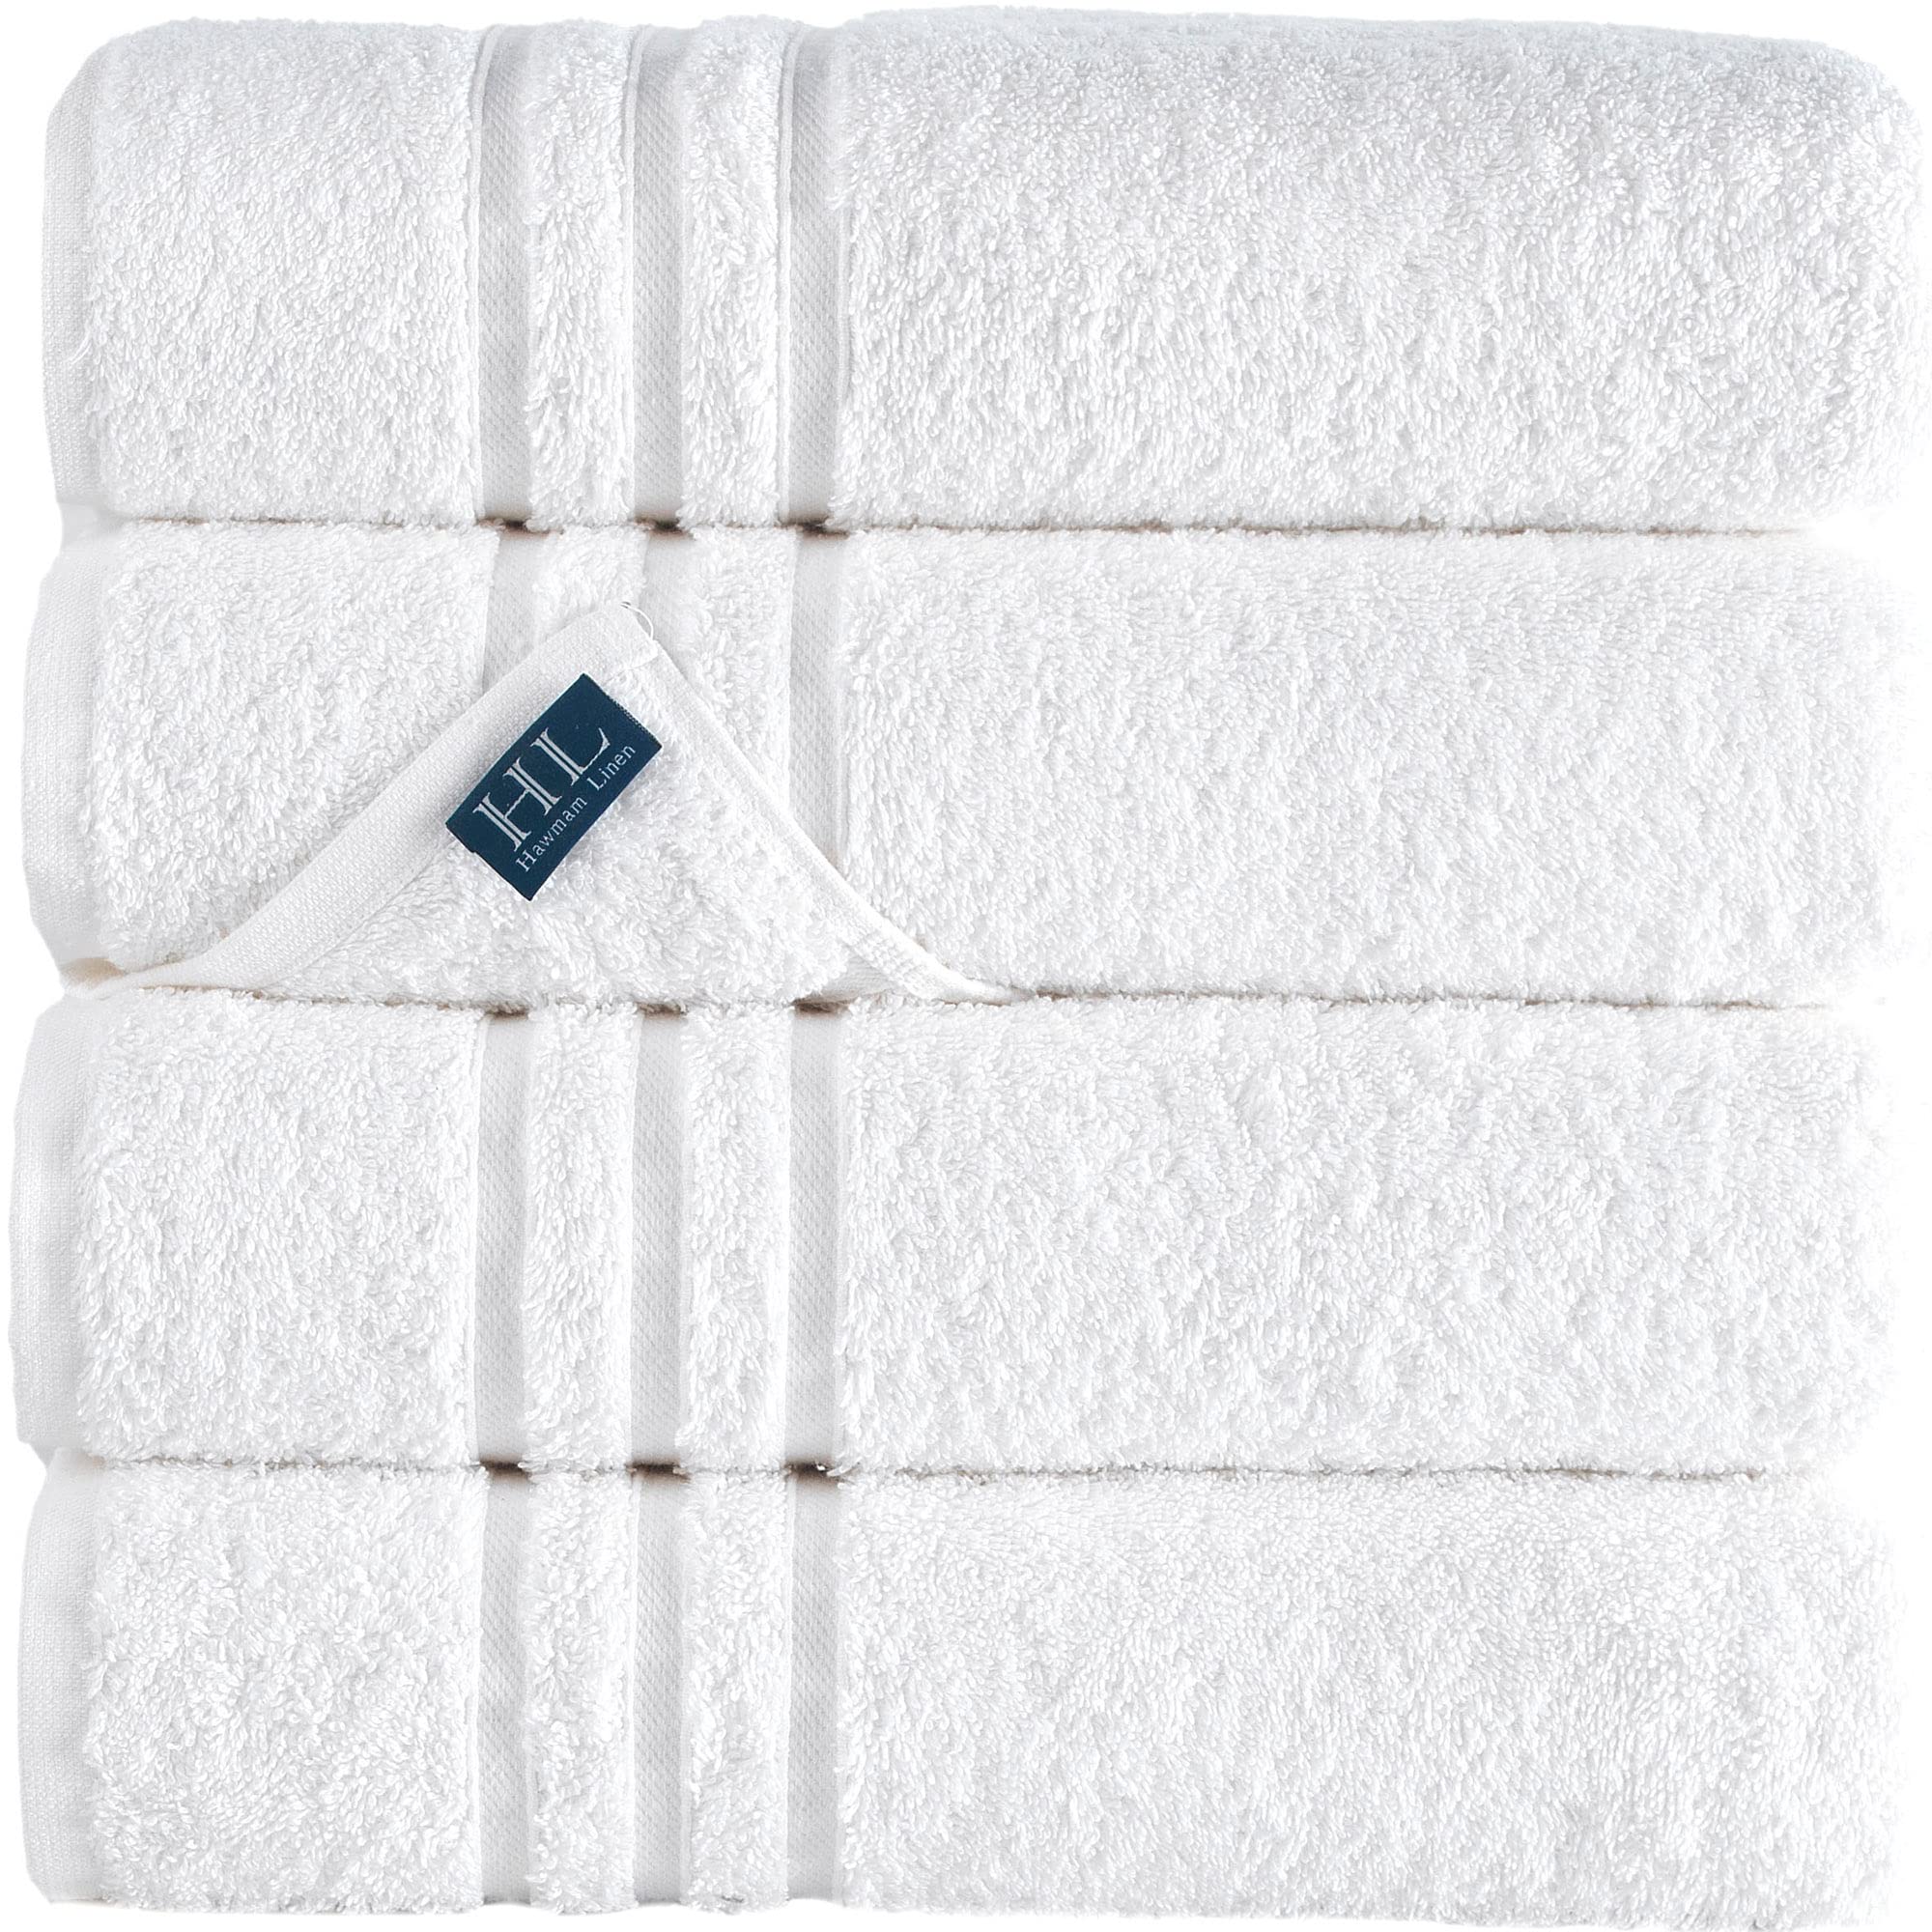 White Classic Luxury Bath Towels - Cotton Hotel Spa Towel 27x54 4-Pack Gray, Size: 27 x 54